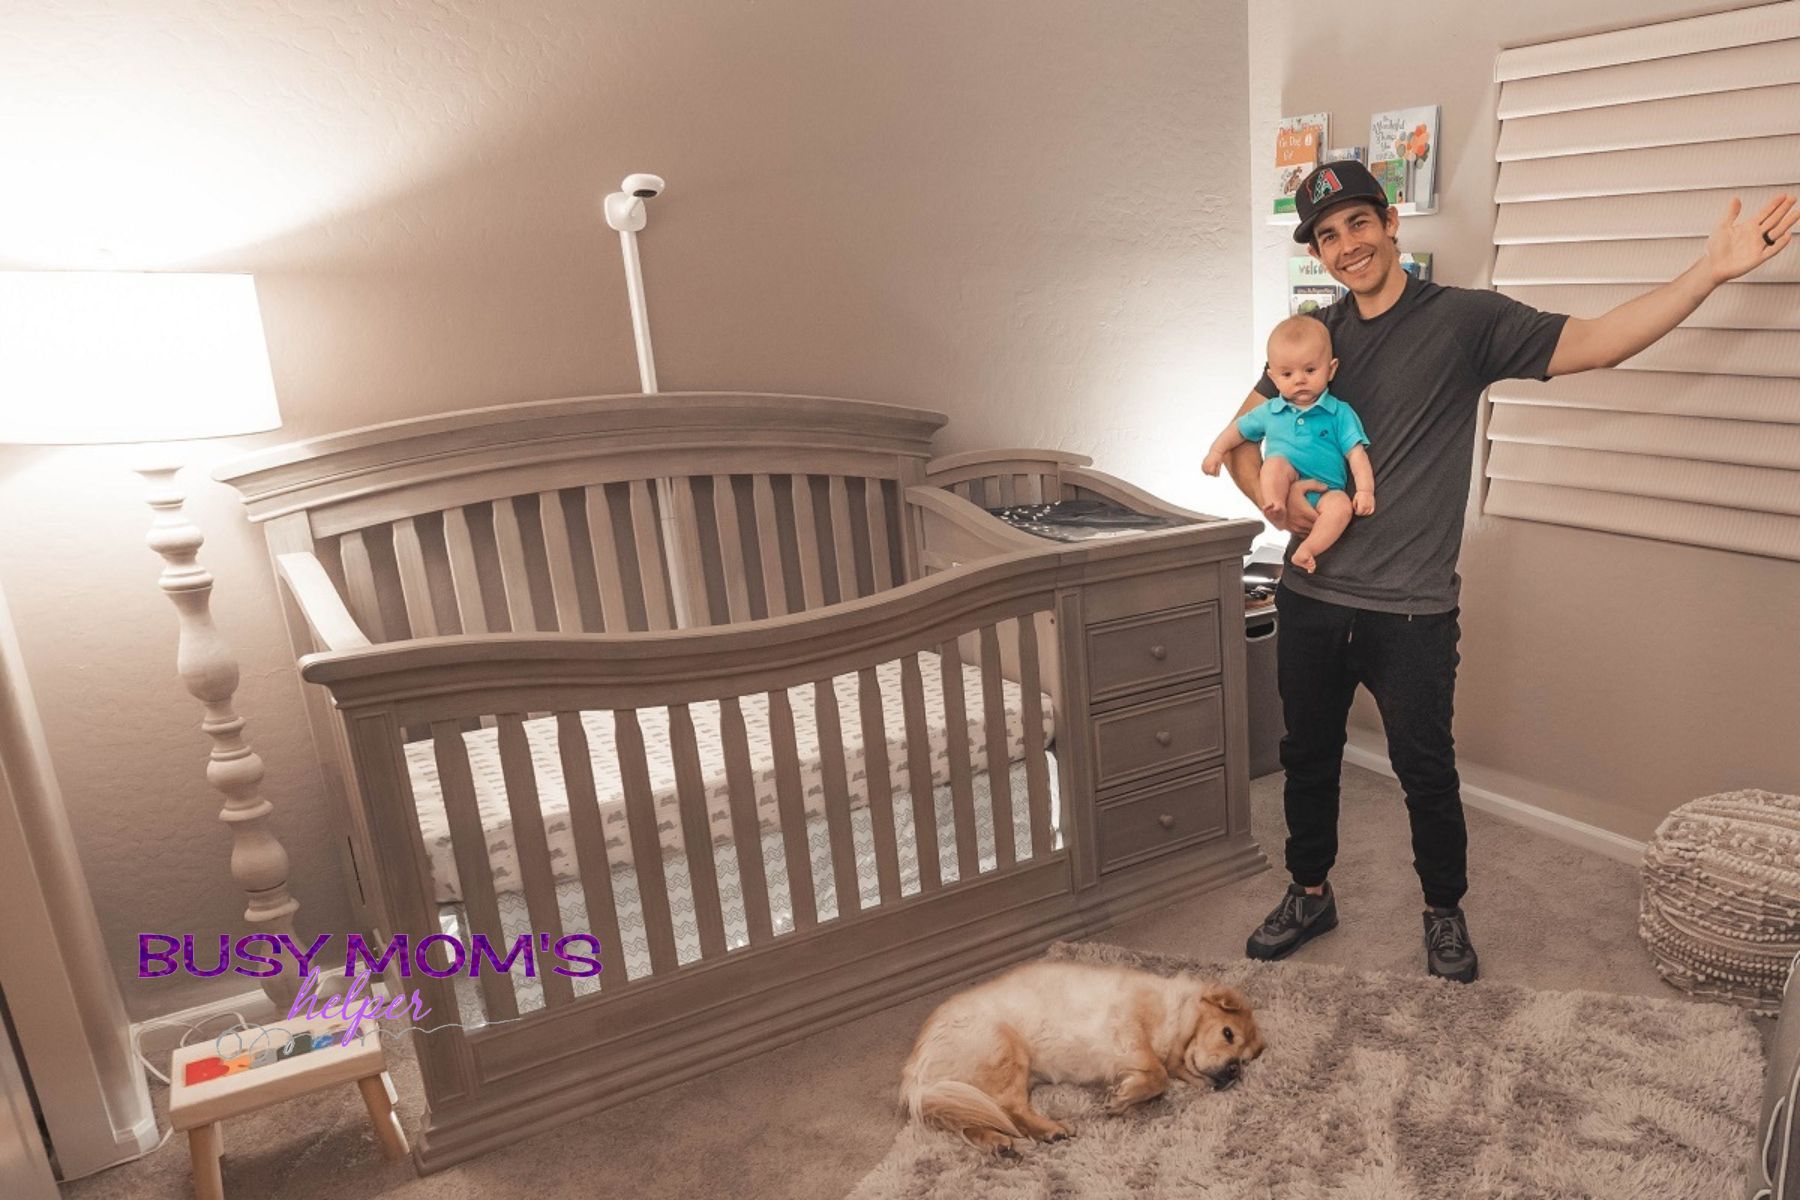 Best Crib With Changing Table Top – Buyer’s Guide & FAQ